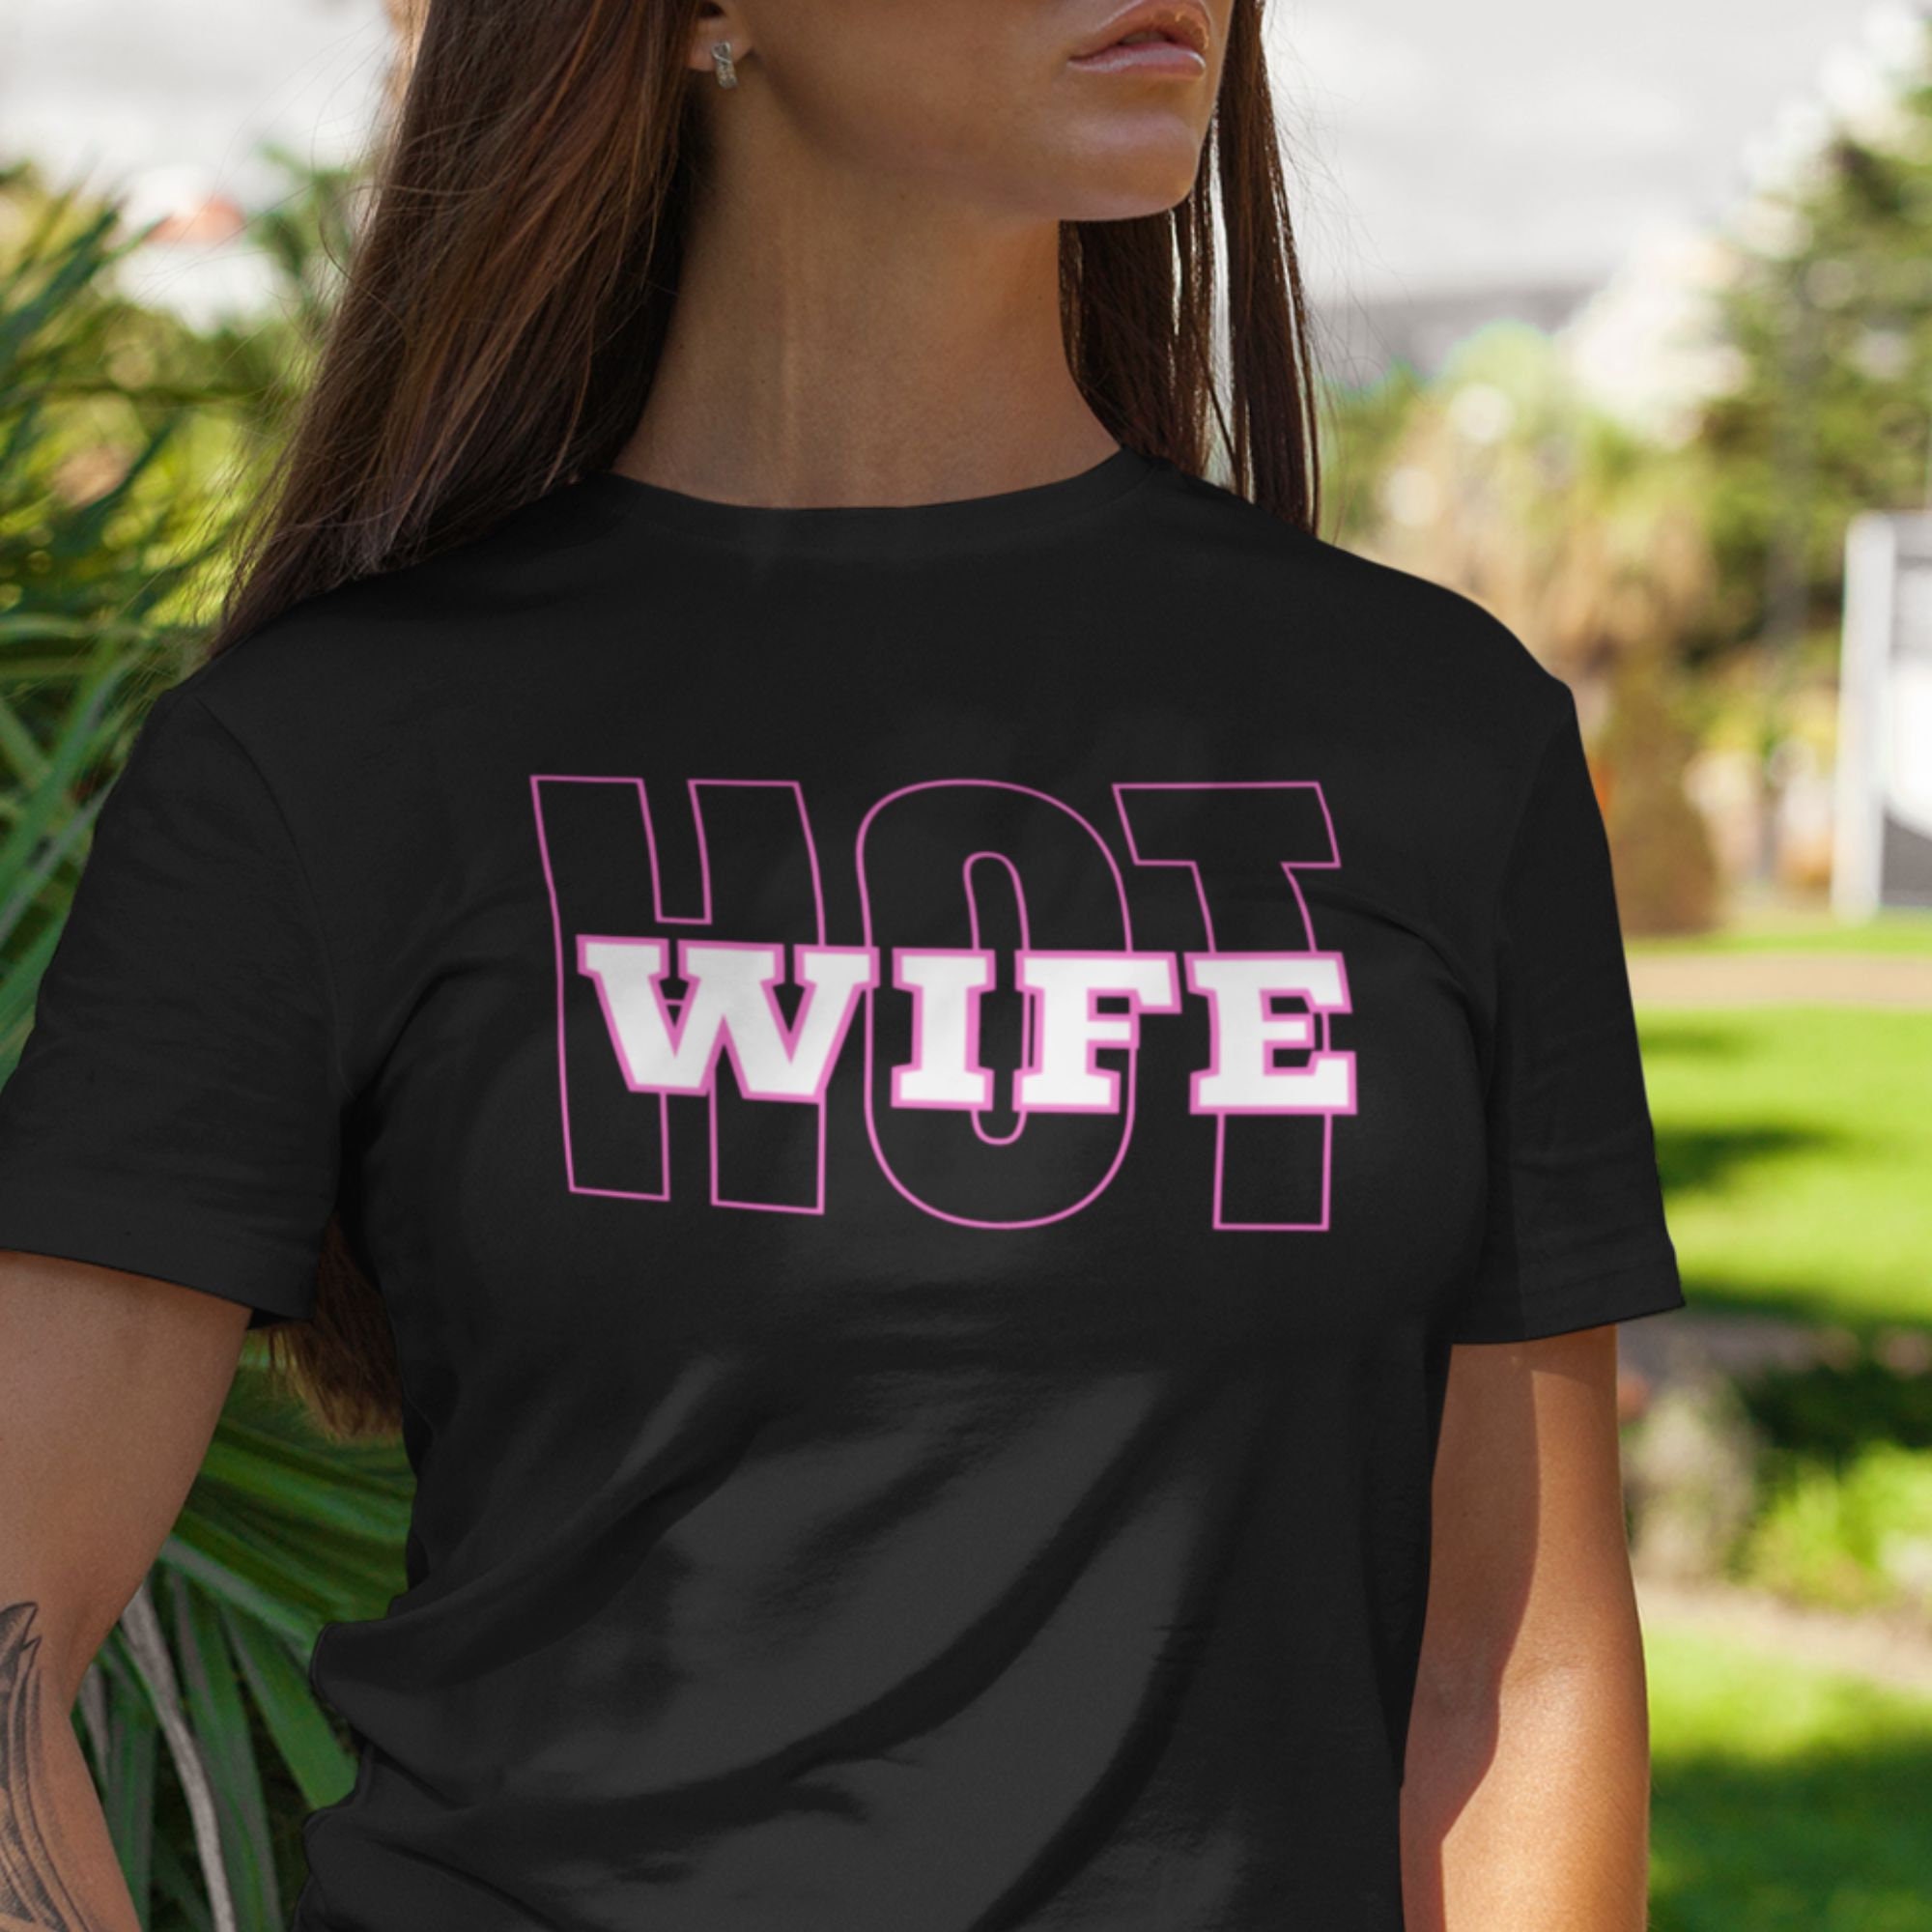 Suggestive Hotwife T-shirt Sexually Provocative Slut Wife Sex Pic Hd